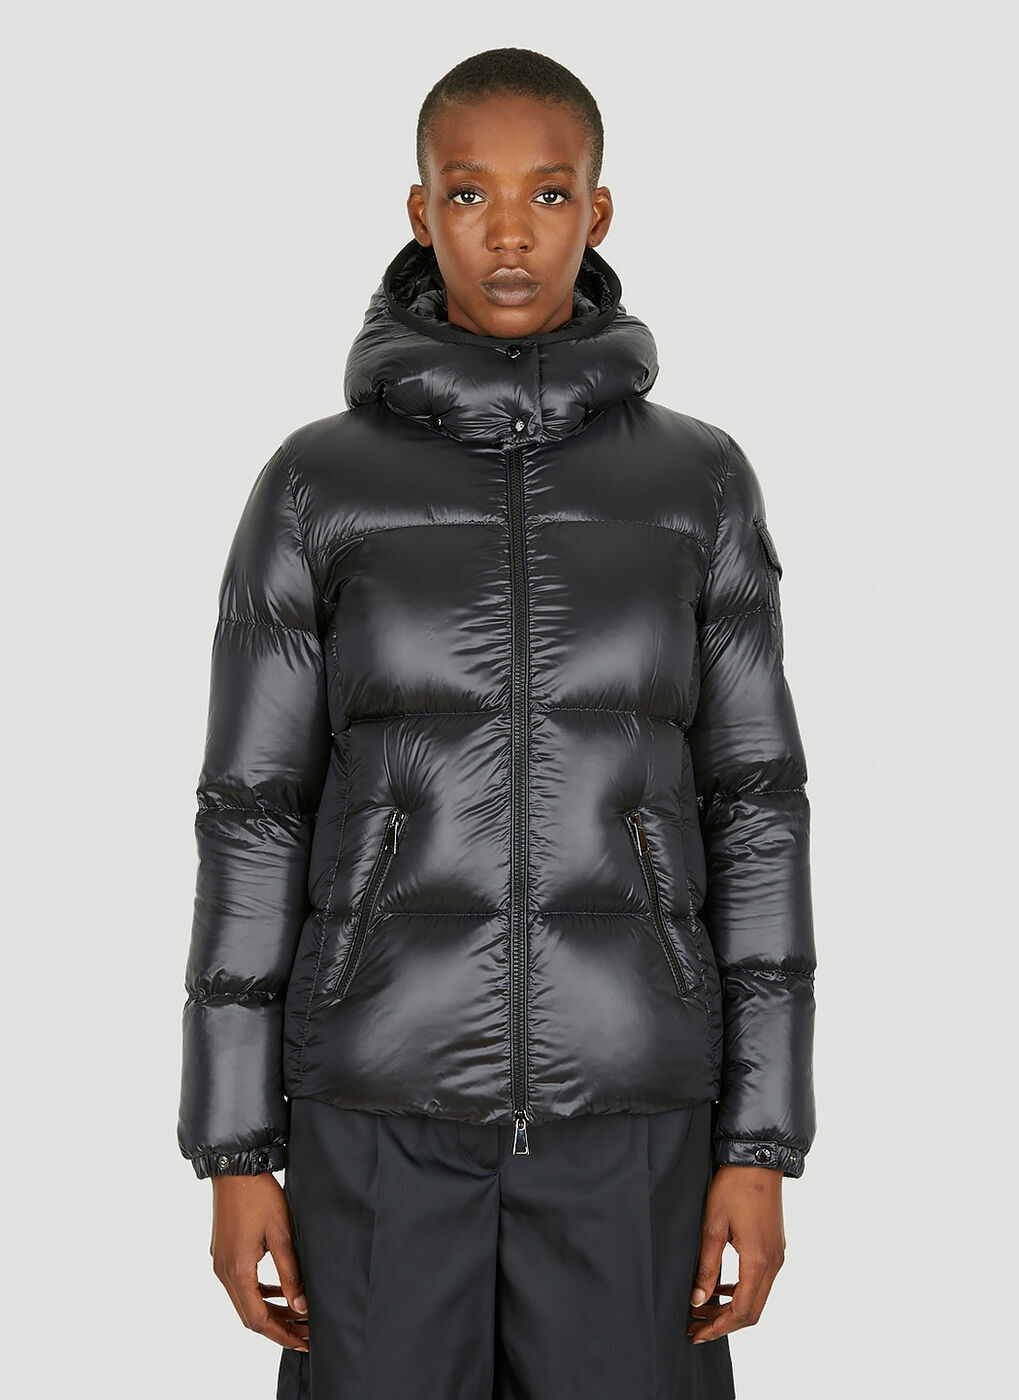 Fourmine Hooded Puffer Jacket in Black Moncler